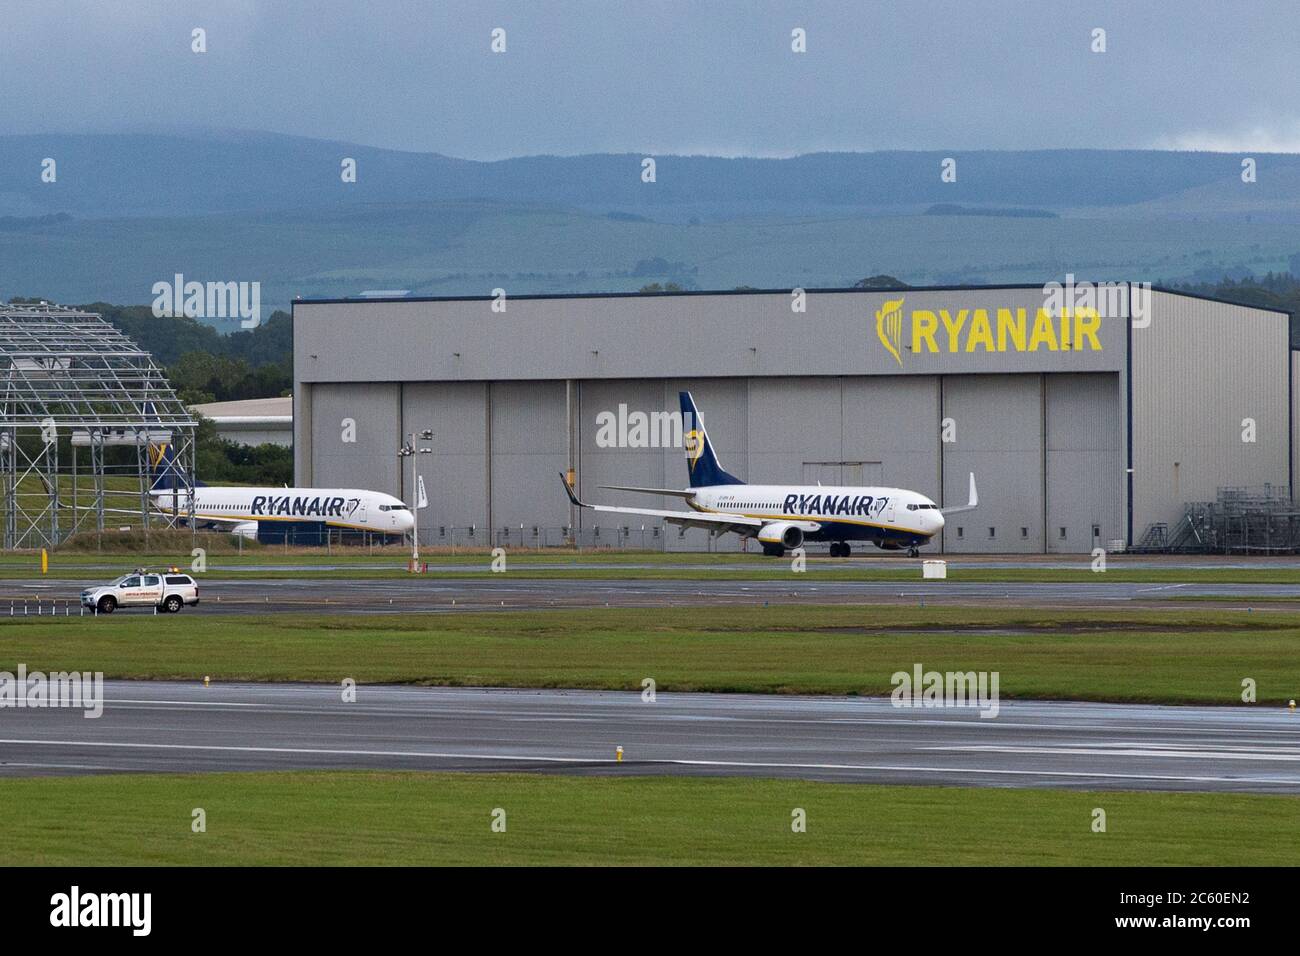 Prestwick, Scotland, UK. 5 July 2020. Ryanair which is one of Europe's largest low cost scheduled airlines, is to axe jobs due to the coronavirus (COVID19) pandemic which has affected the global aviation industry, forcing many airlines to either go bust or cut huge numbers of staff in order to survive. Credit: Colin Fisher/Alamy Live News. Stock Photo